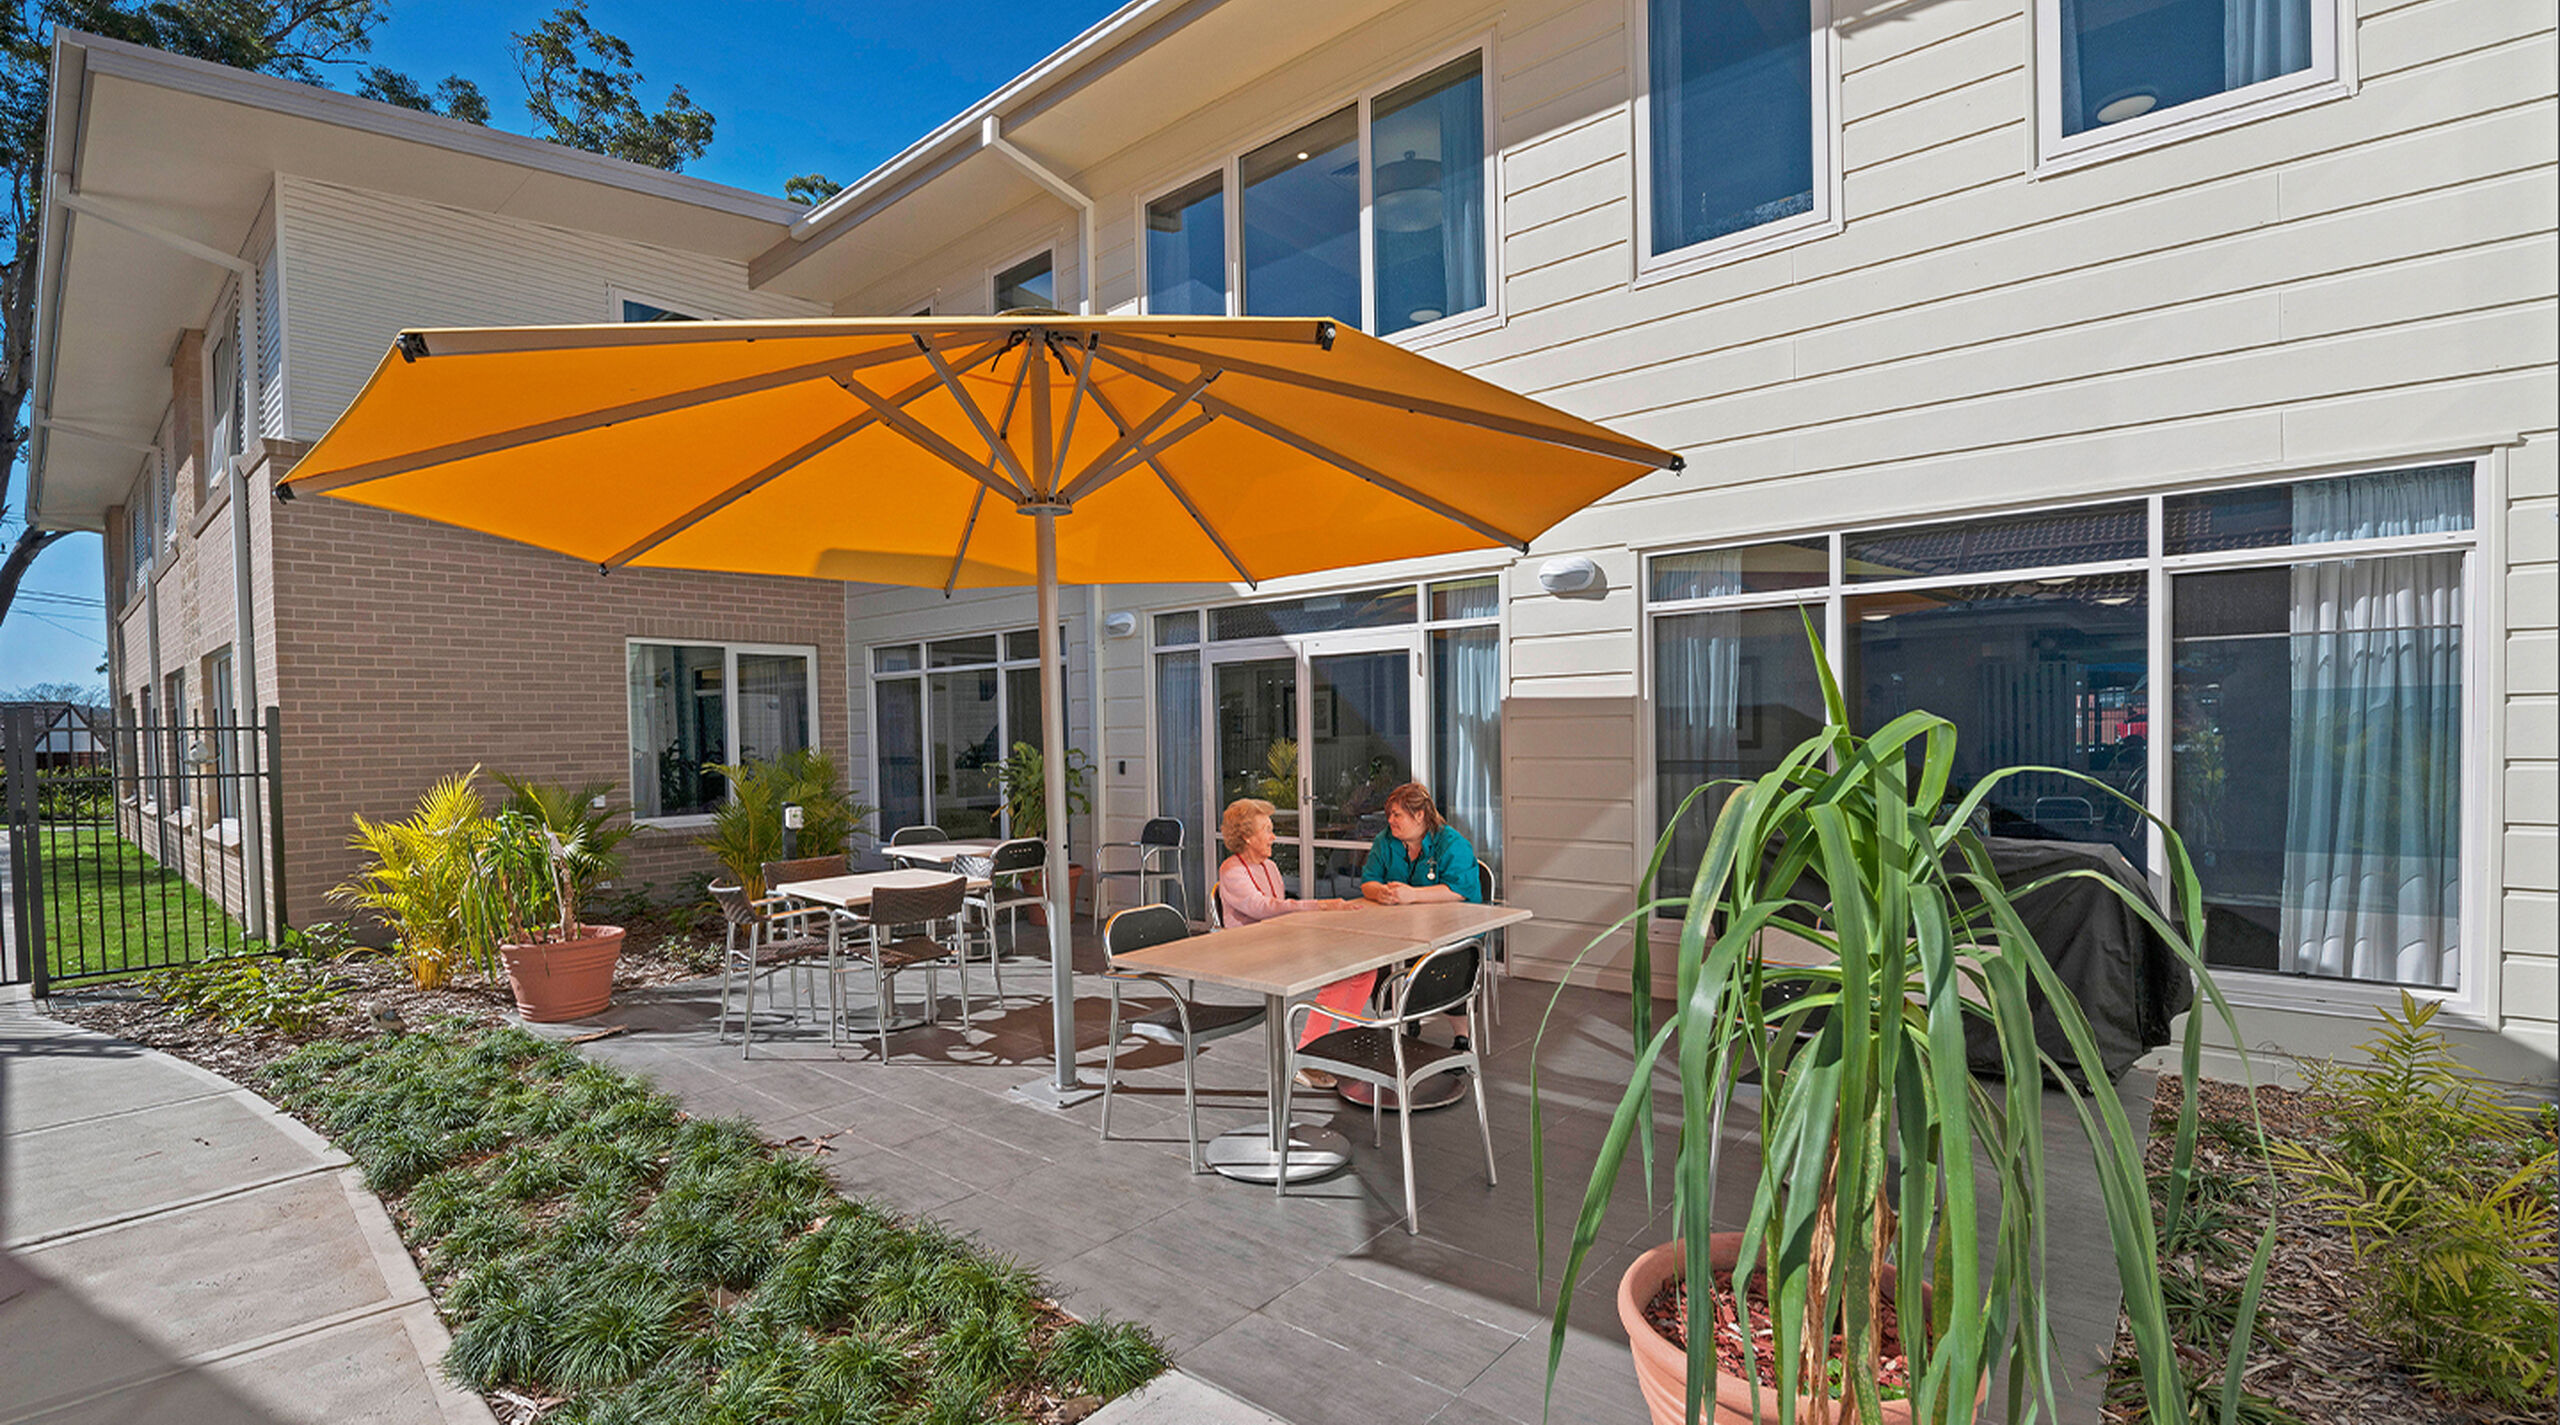 modern two story aged care home with outdoor sitting area covered by a large umbrella overlooking beautiful gardens at baptistcare orana centre aged care home in point clare nsw aged care near gosford central coast